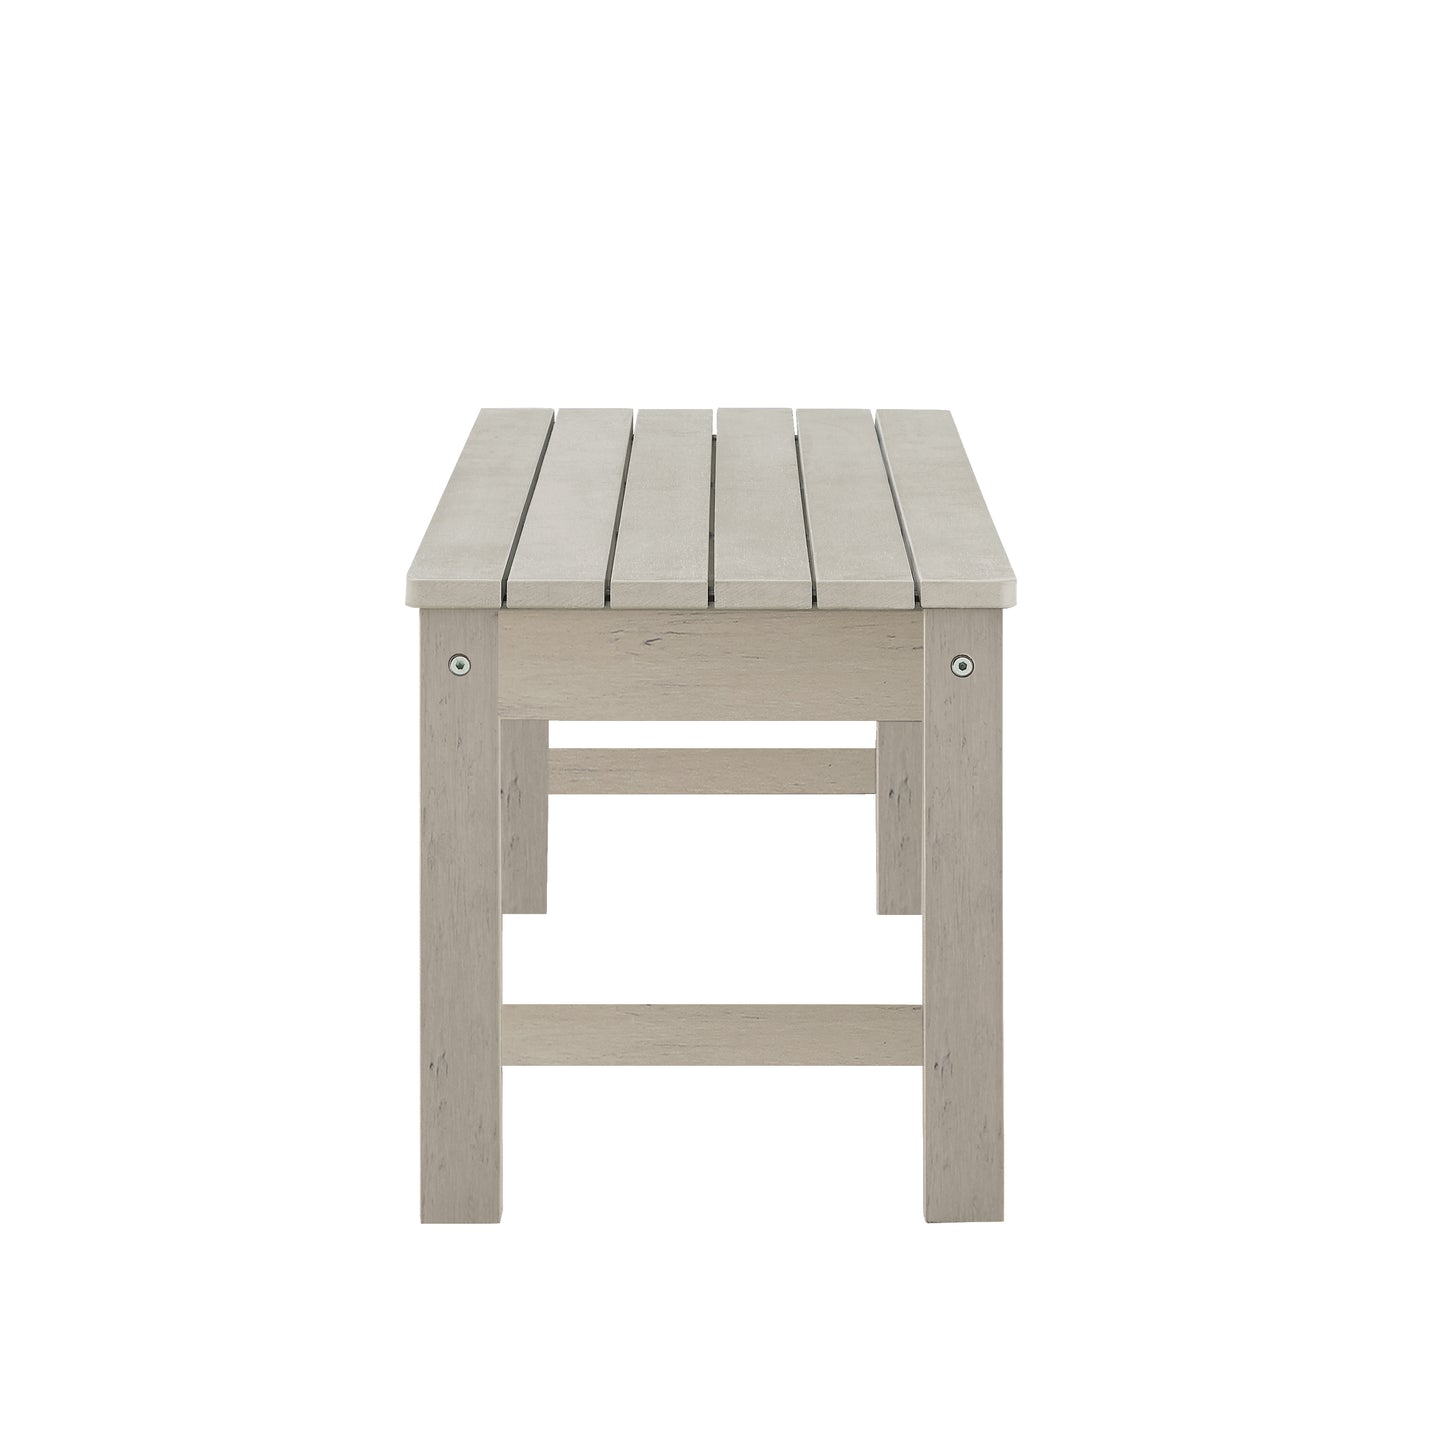 Winawood Backless 2 Seater Wood Effect Bench - Stone Grey